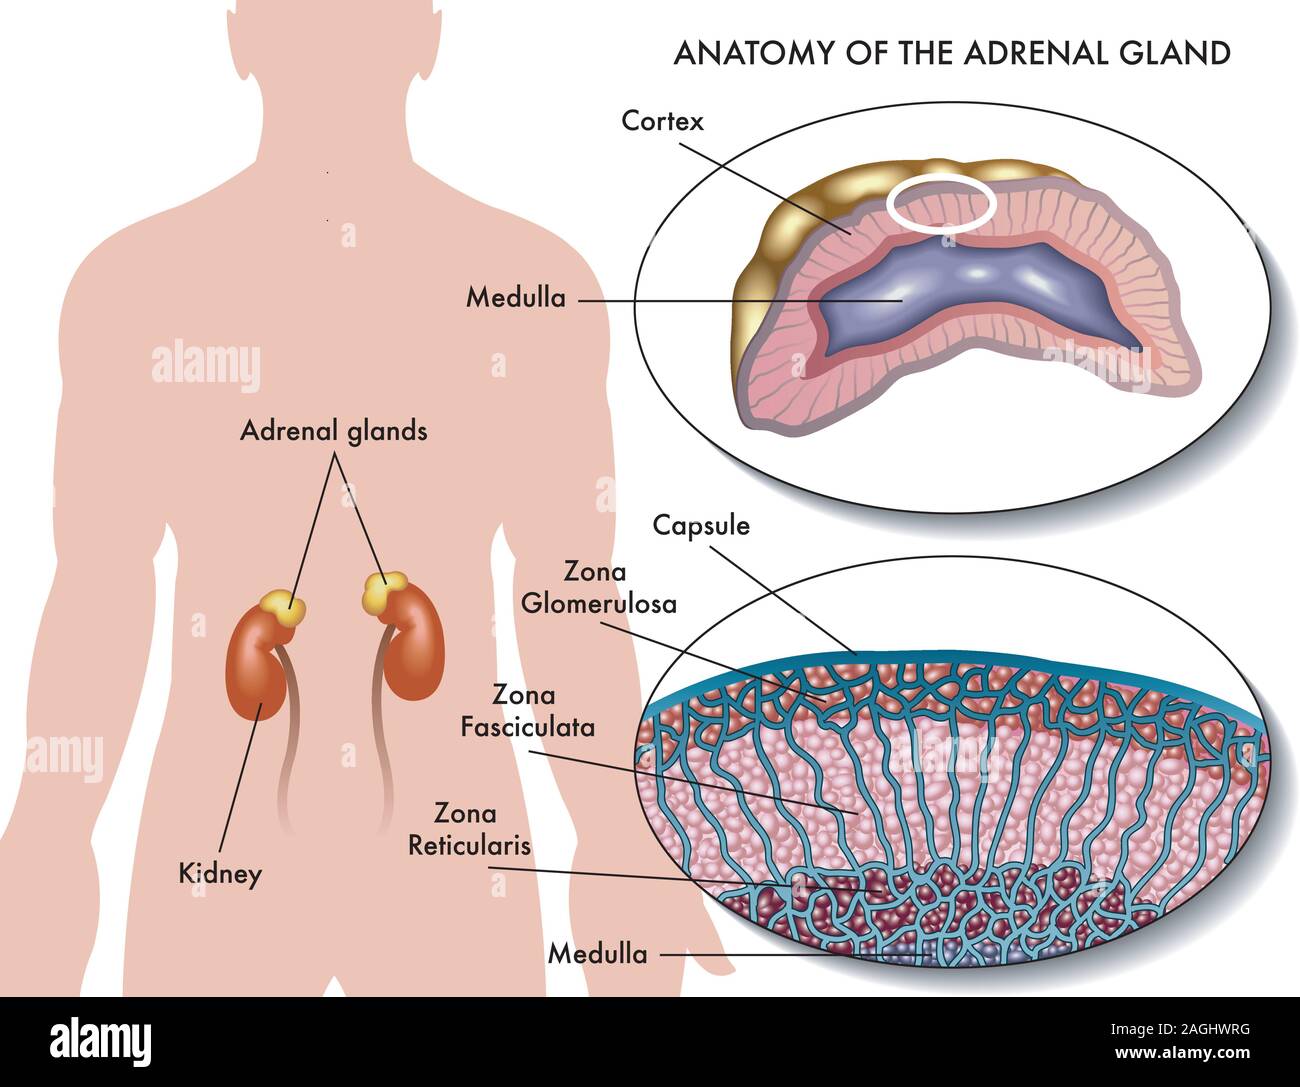 Medical illustration of anatomy of adrenal gland. Stock Vector